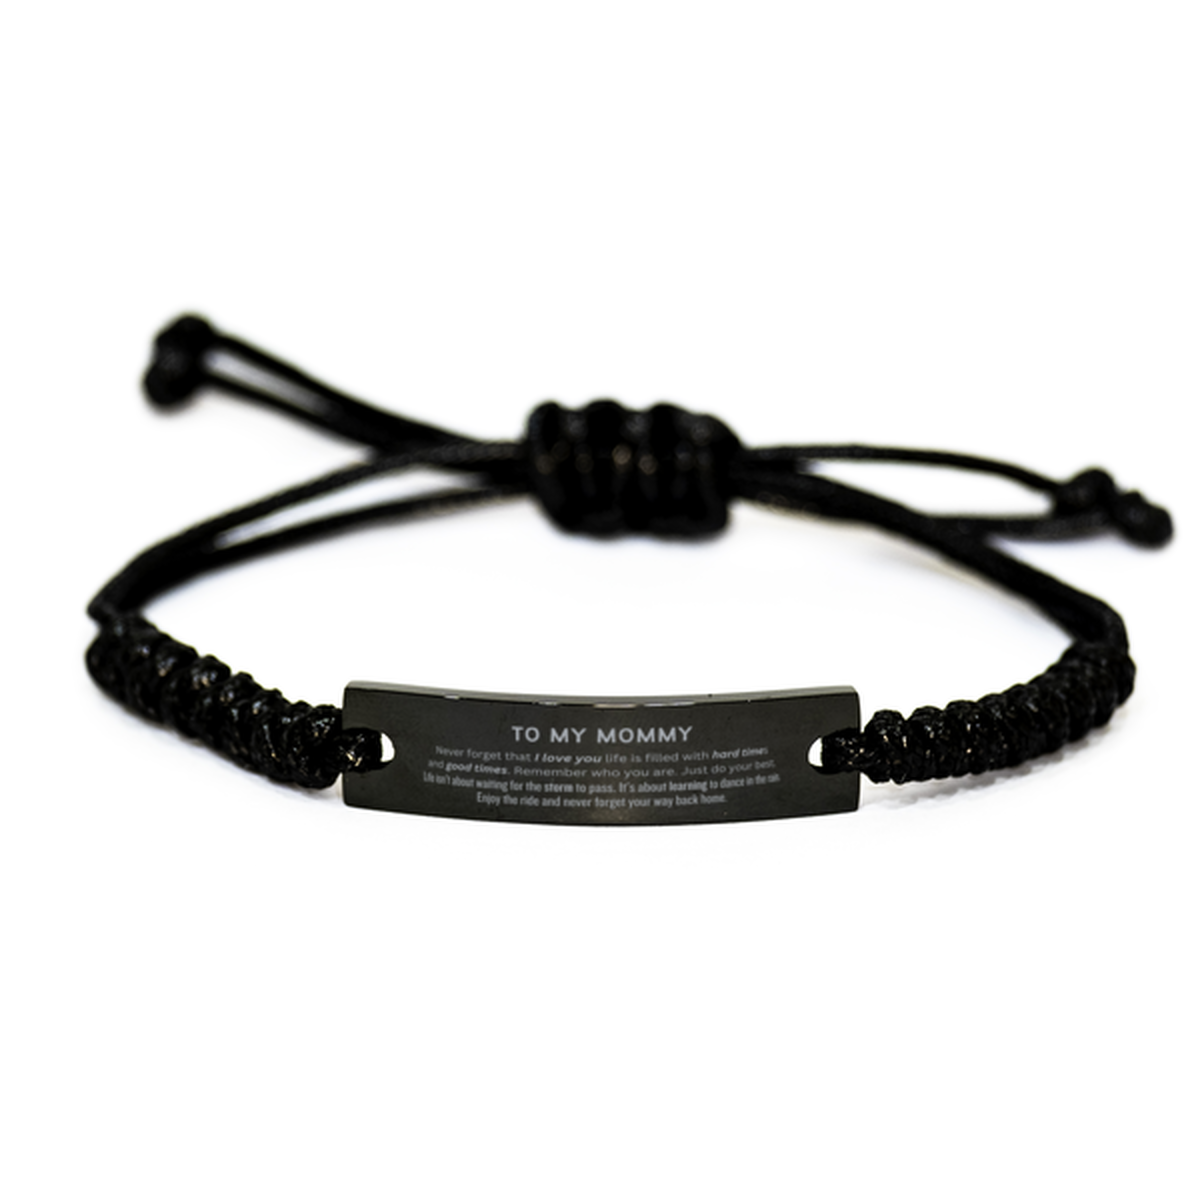 Christmas Mommy Black Rope Bracelet Gifts, To My Mommy Birthday Thank You Gifts For Mommy, Graduation Unique Gifts For Mommy To My Mommy Never forget that I love you life is filled with hard times and good times. Remember who you are. Just do your best